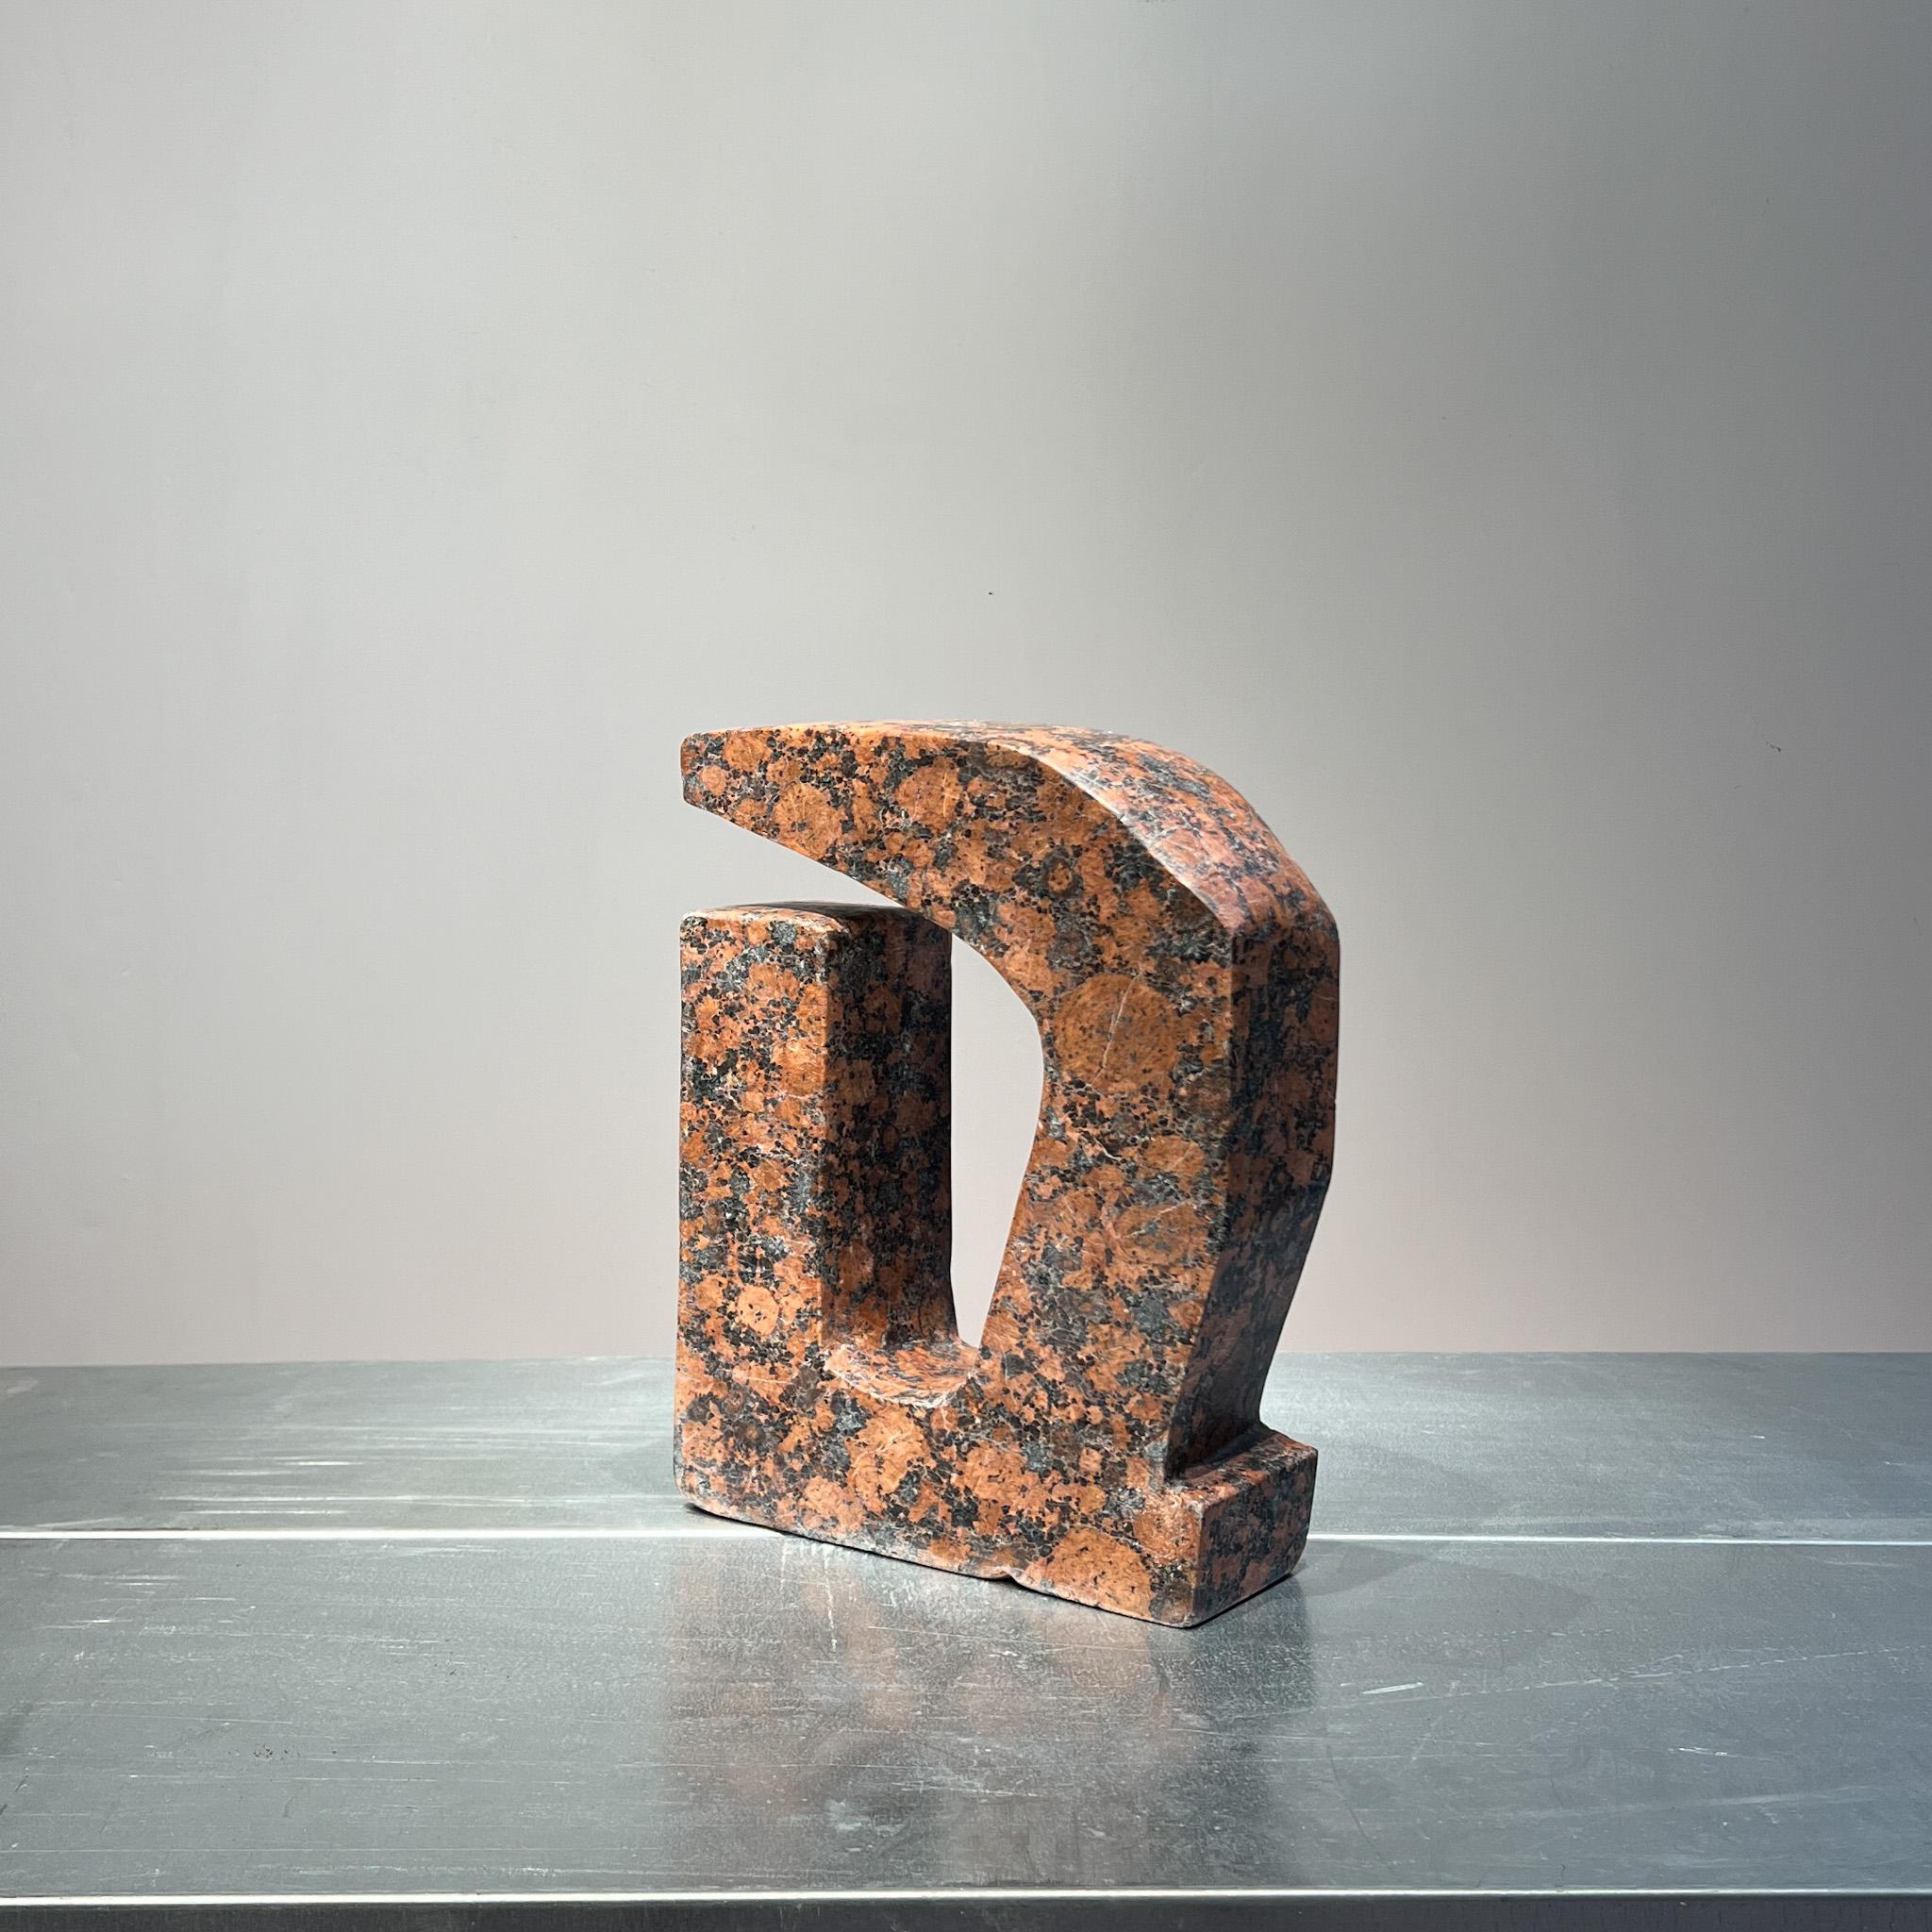 Handcarved  sculpture of a abstract shape in brutalist style,
This sculpture with in a stunning pink granite texture emphasizes the strong abstract shape. 

This sculpture with its rounded shapes, creating a composition that emphasizes the